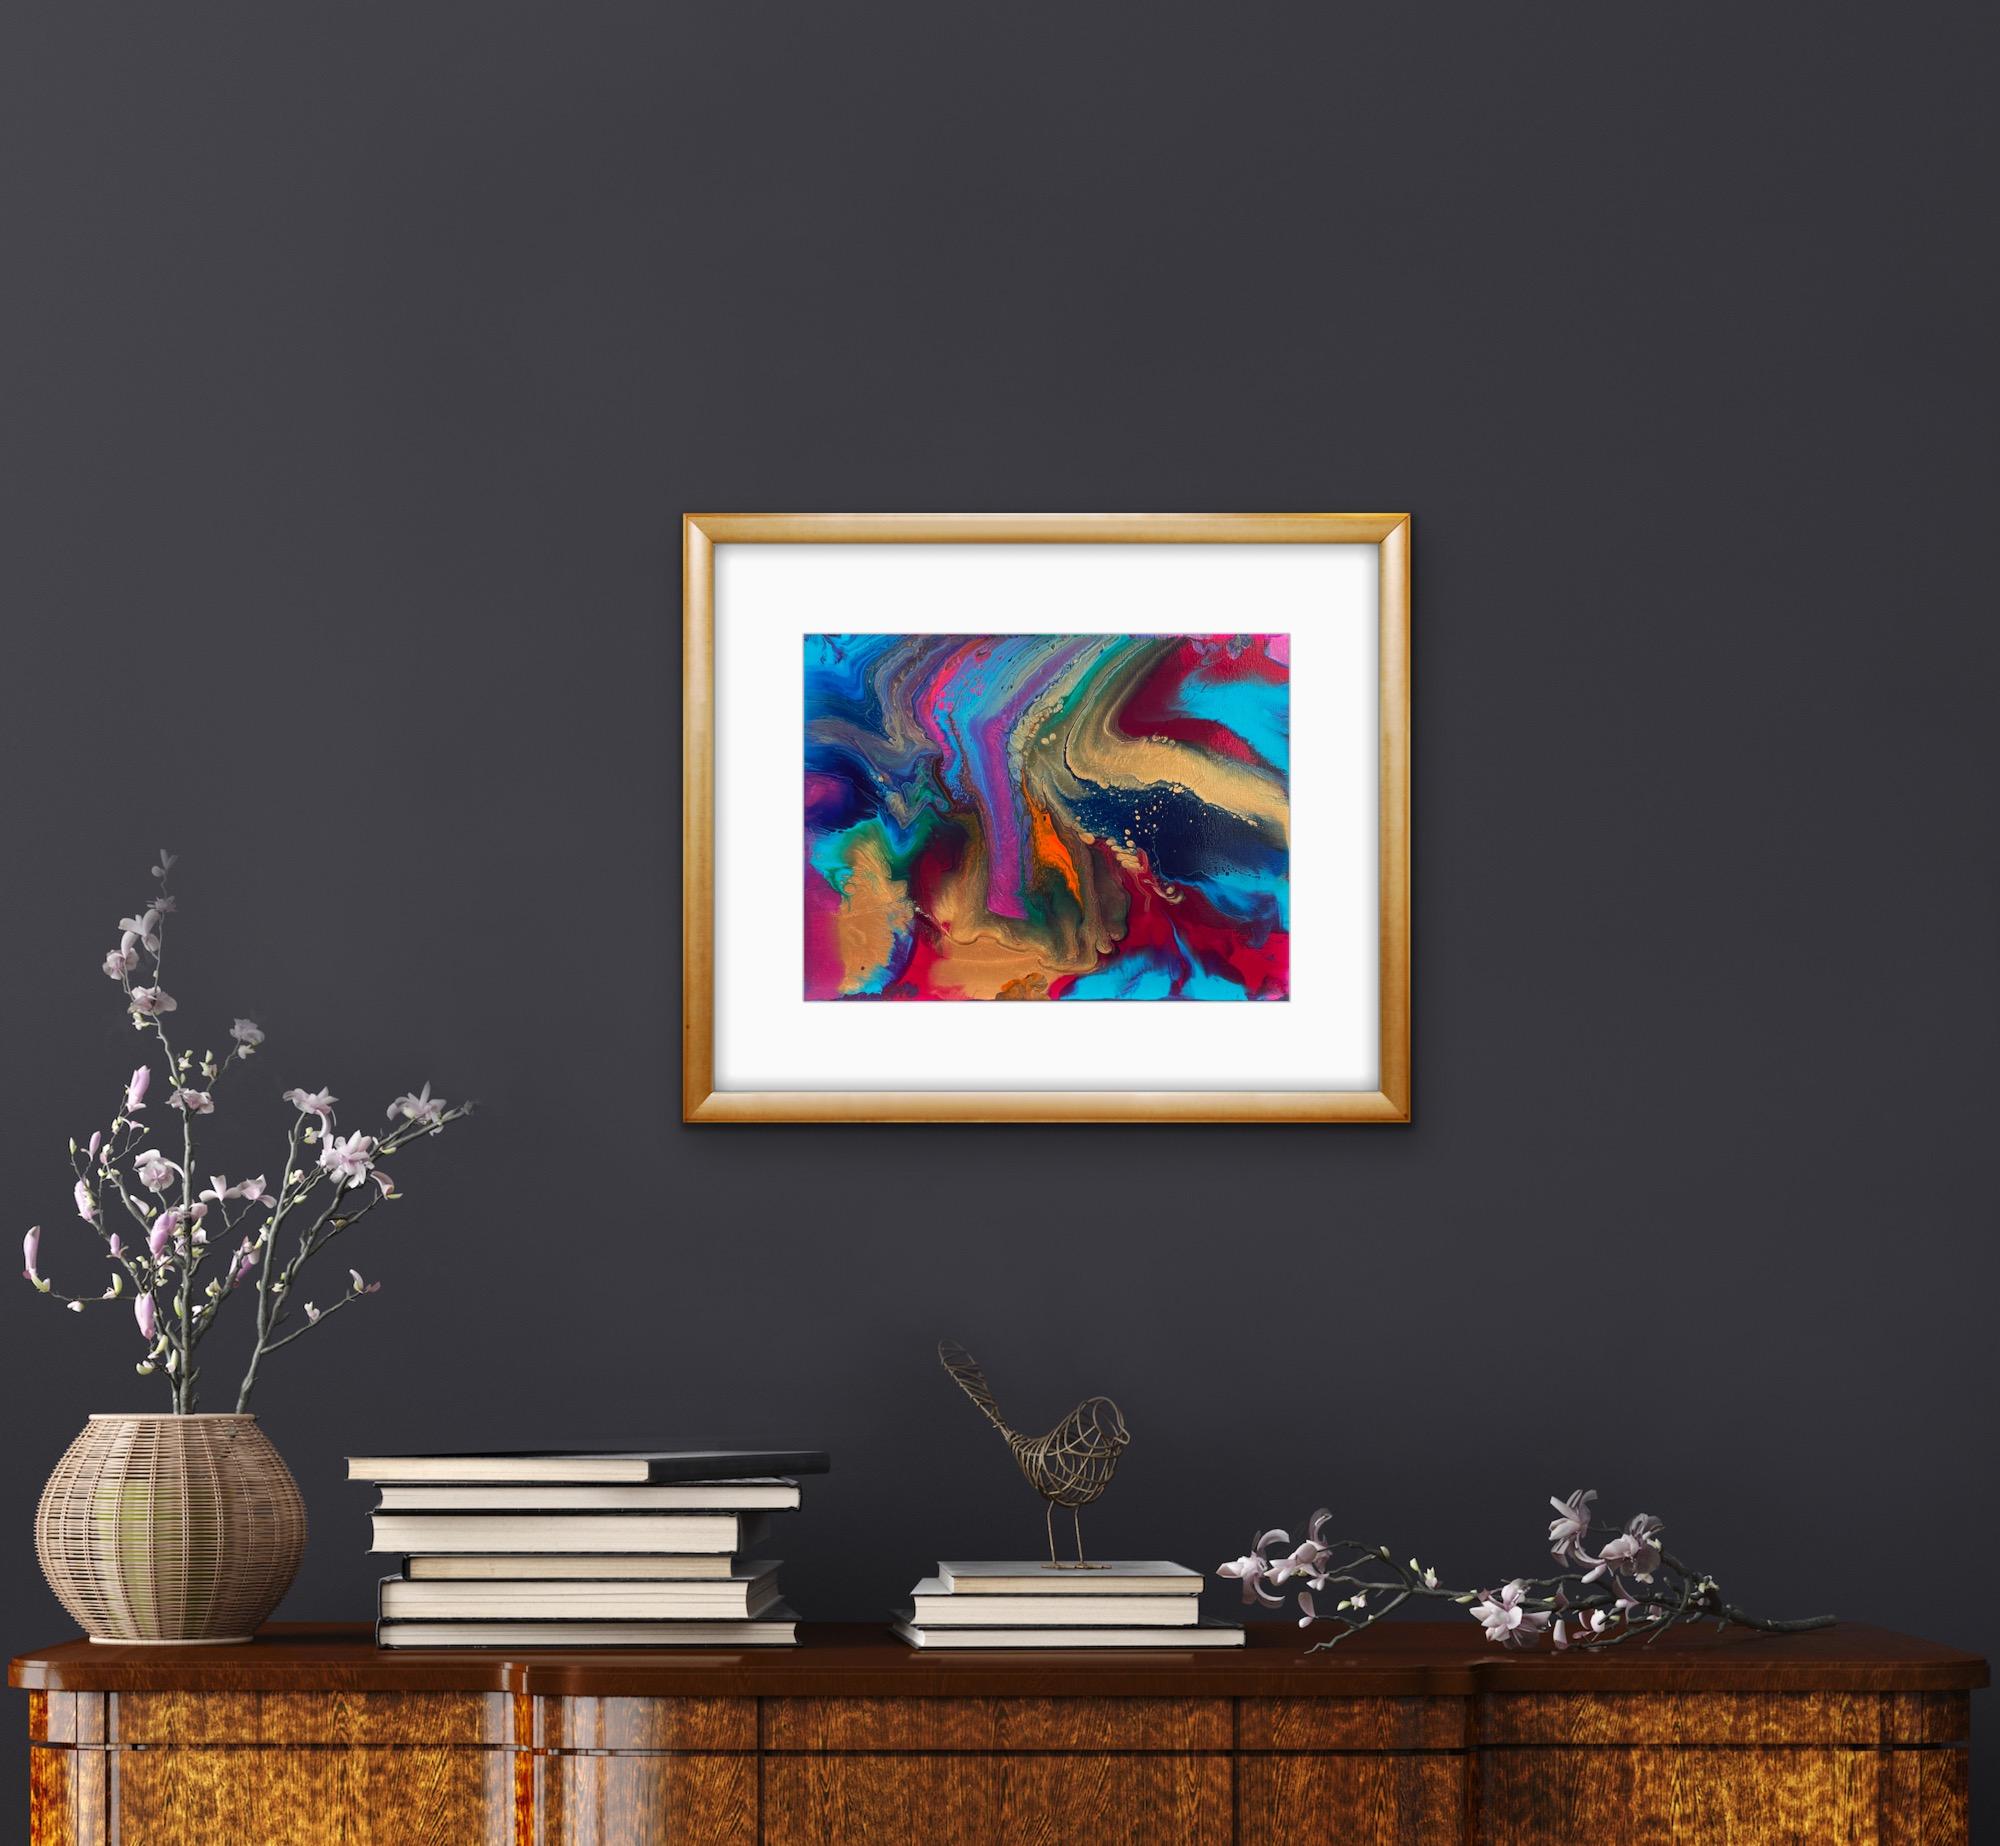 Number 2 of a trio set, this image has more cells and linear movement. The colors are stacked but blend seamlessly. It's calling your name with every color.